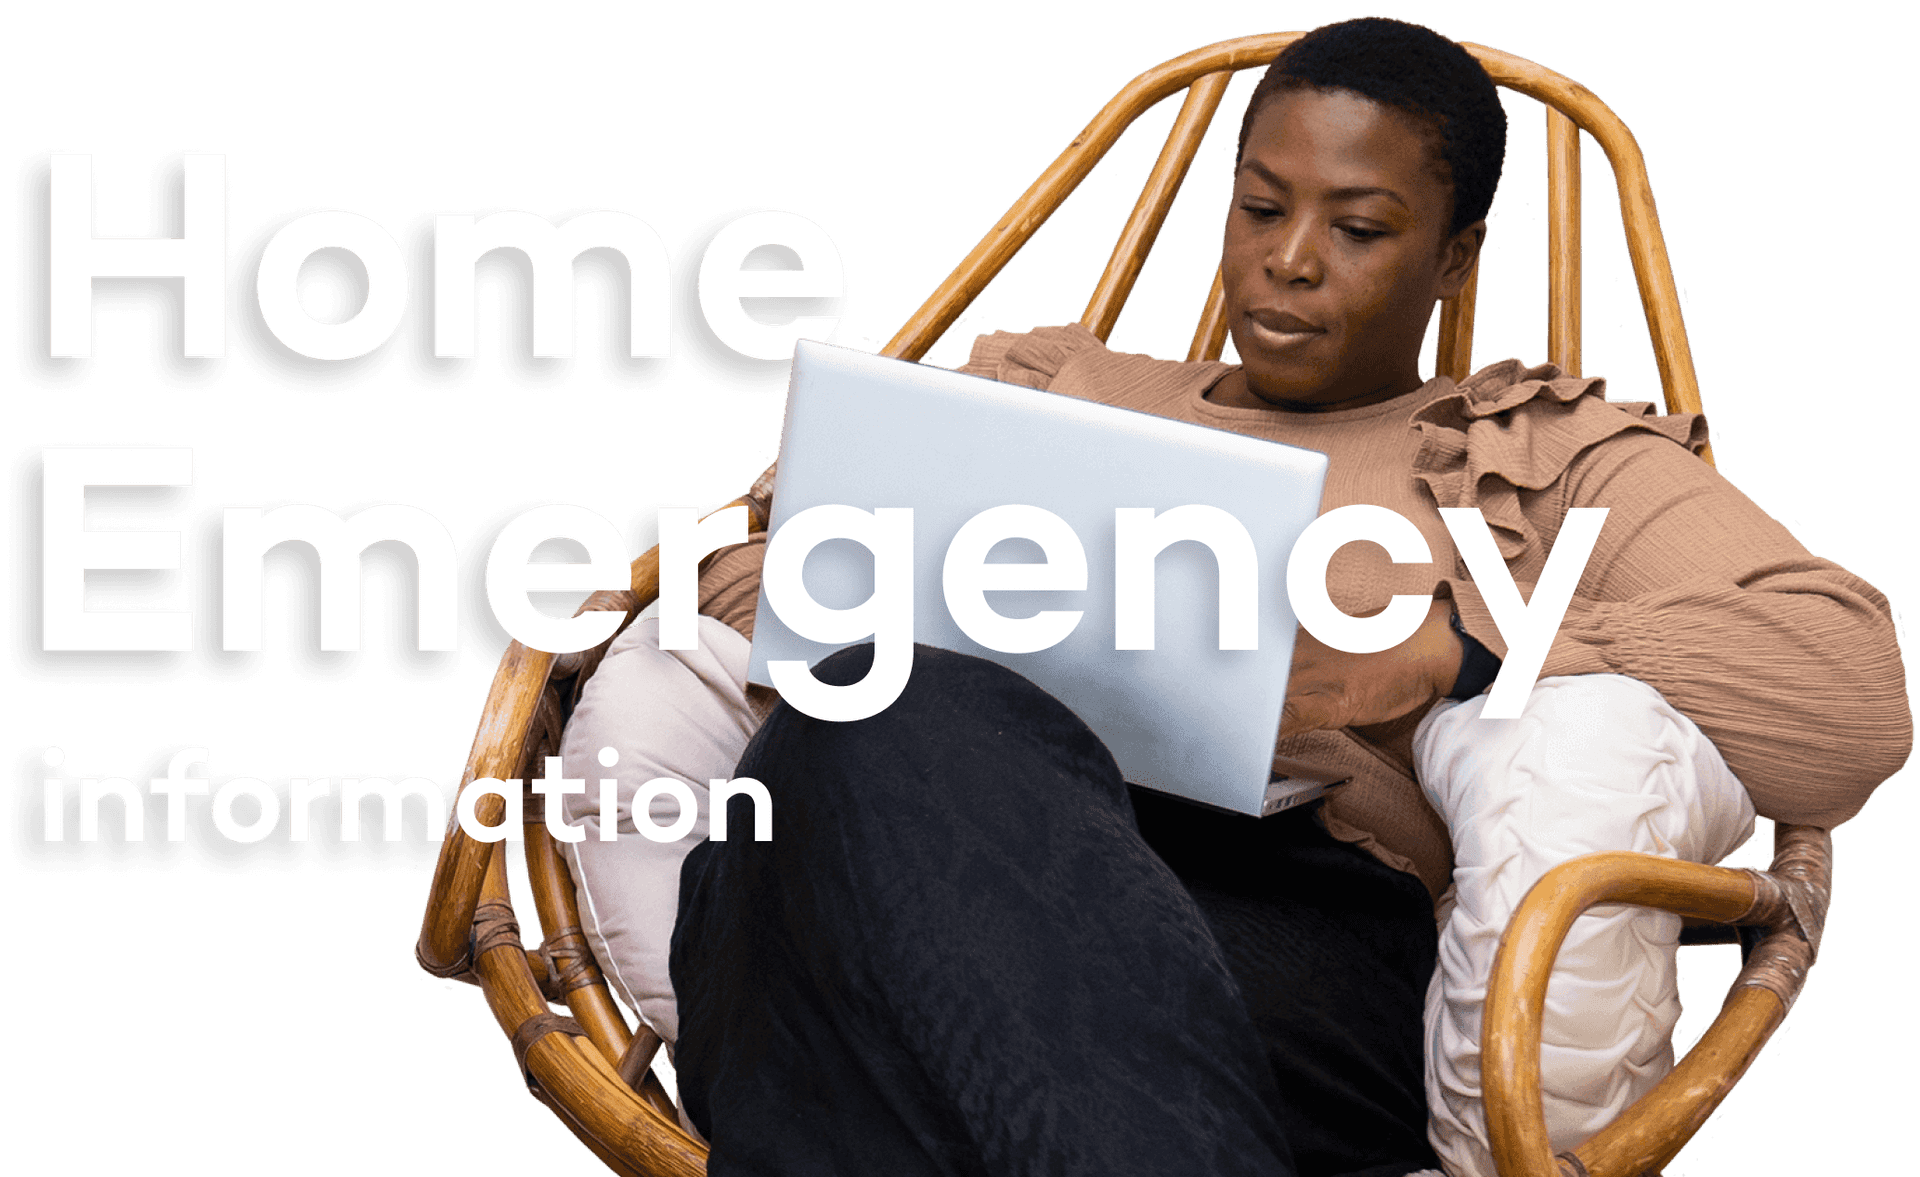 Home emergency information